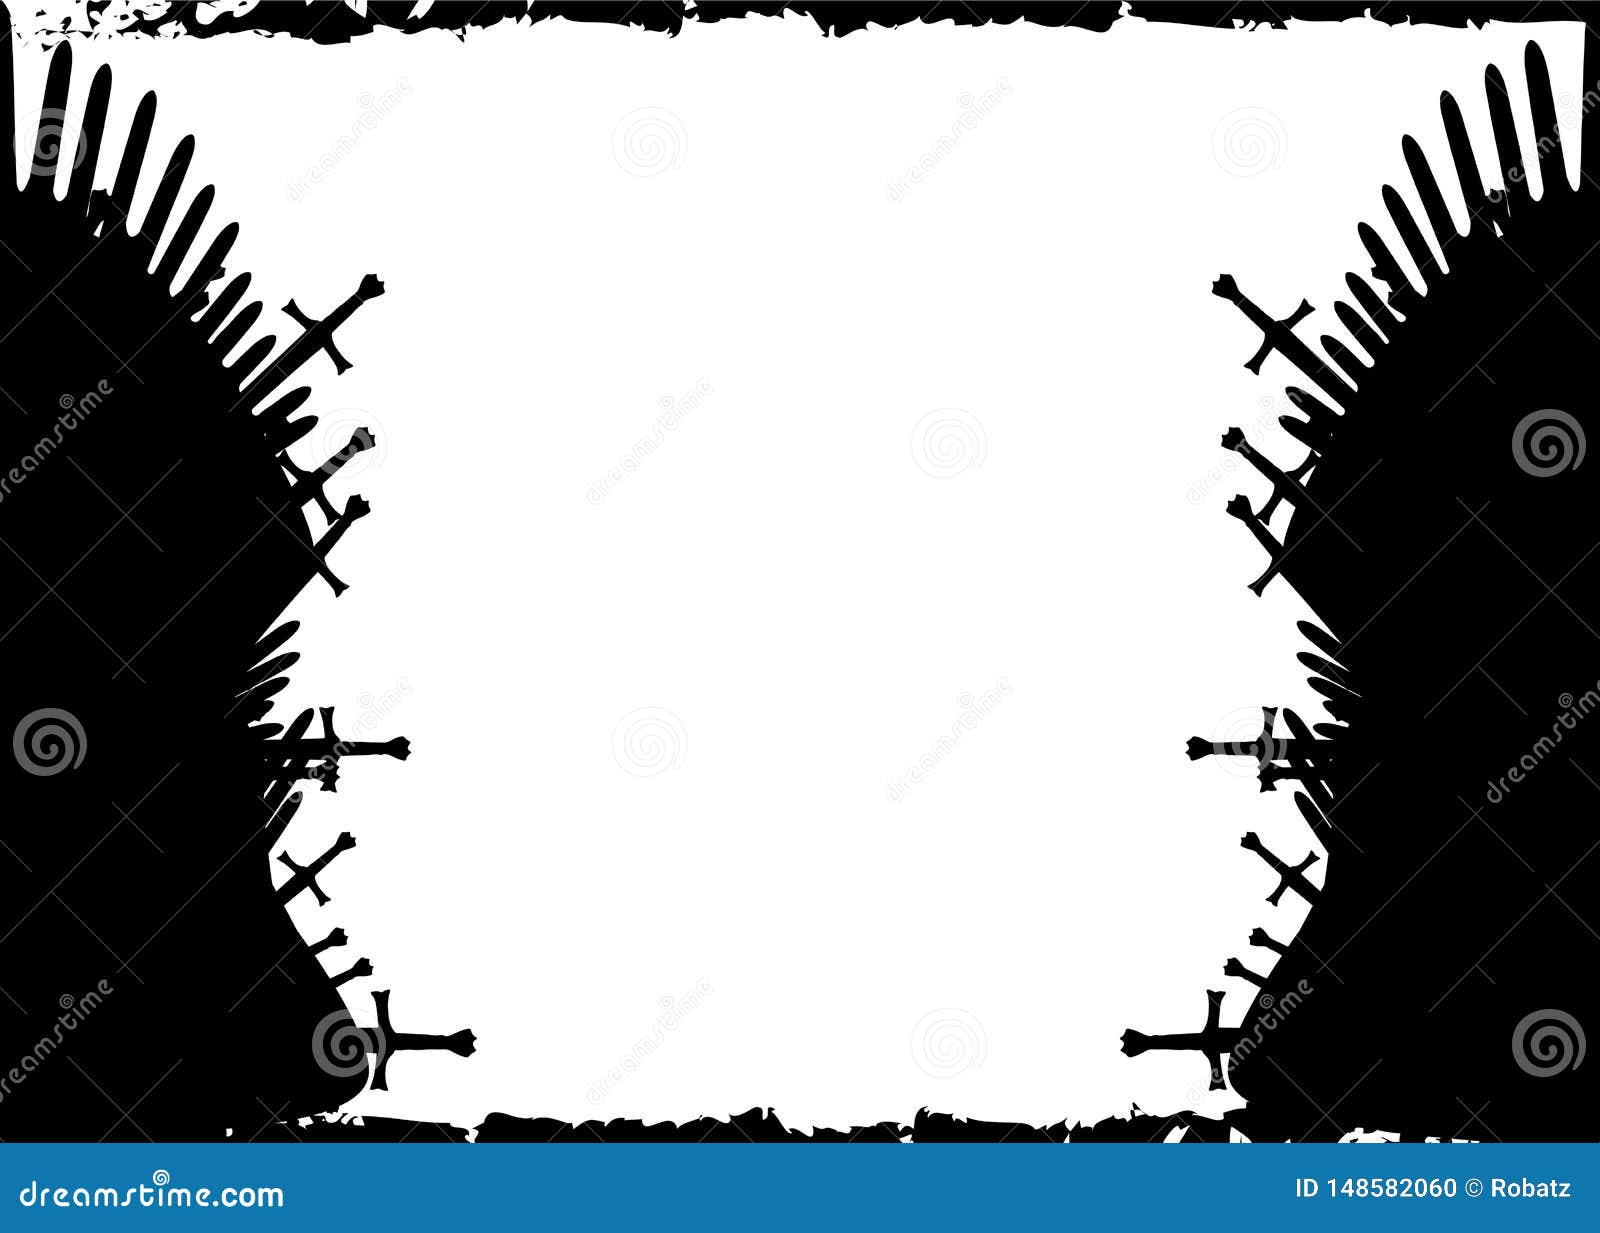 thrones template. hand drawn iron throne of westeros made of antique swords or metal blades. ceremonial chair built of weapon